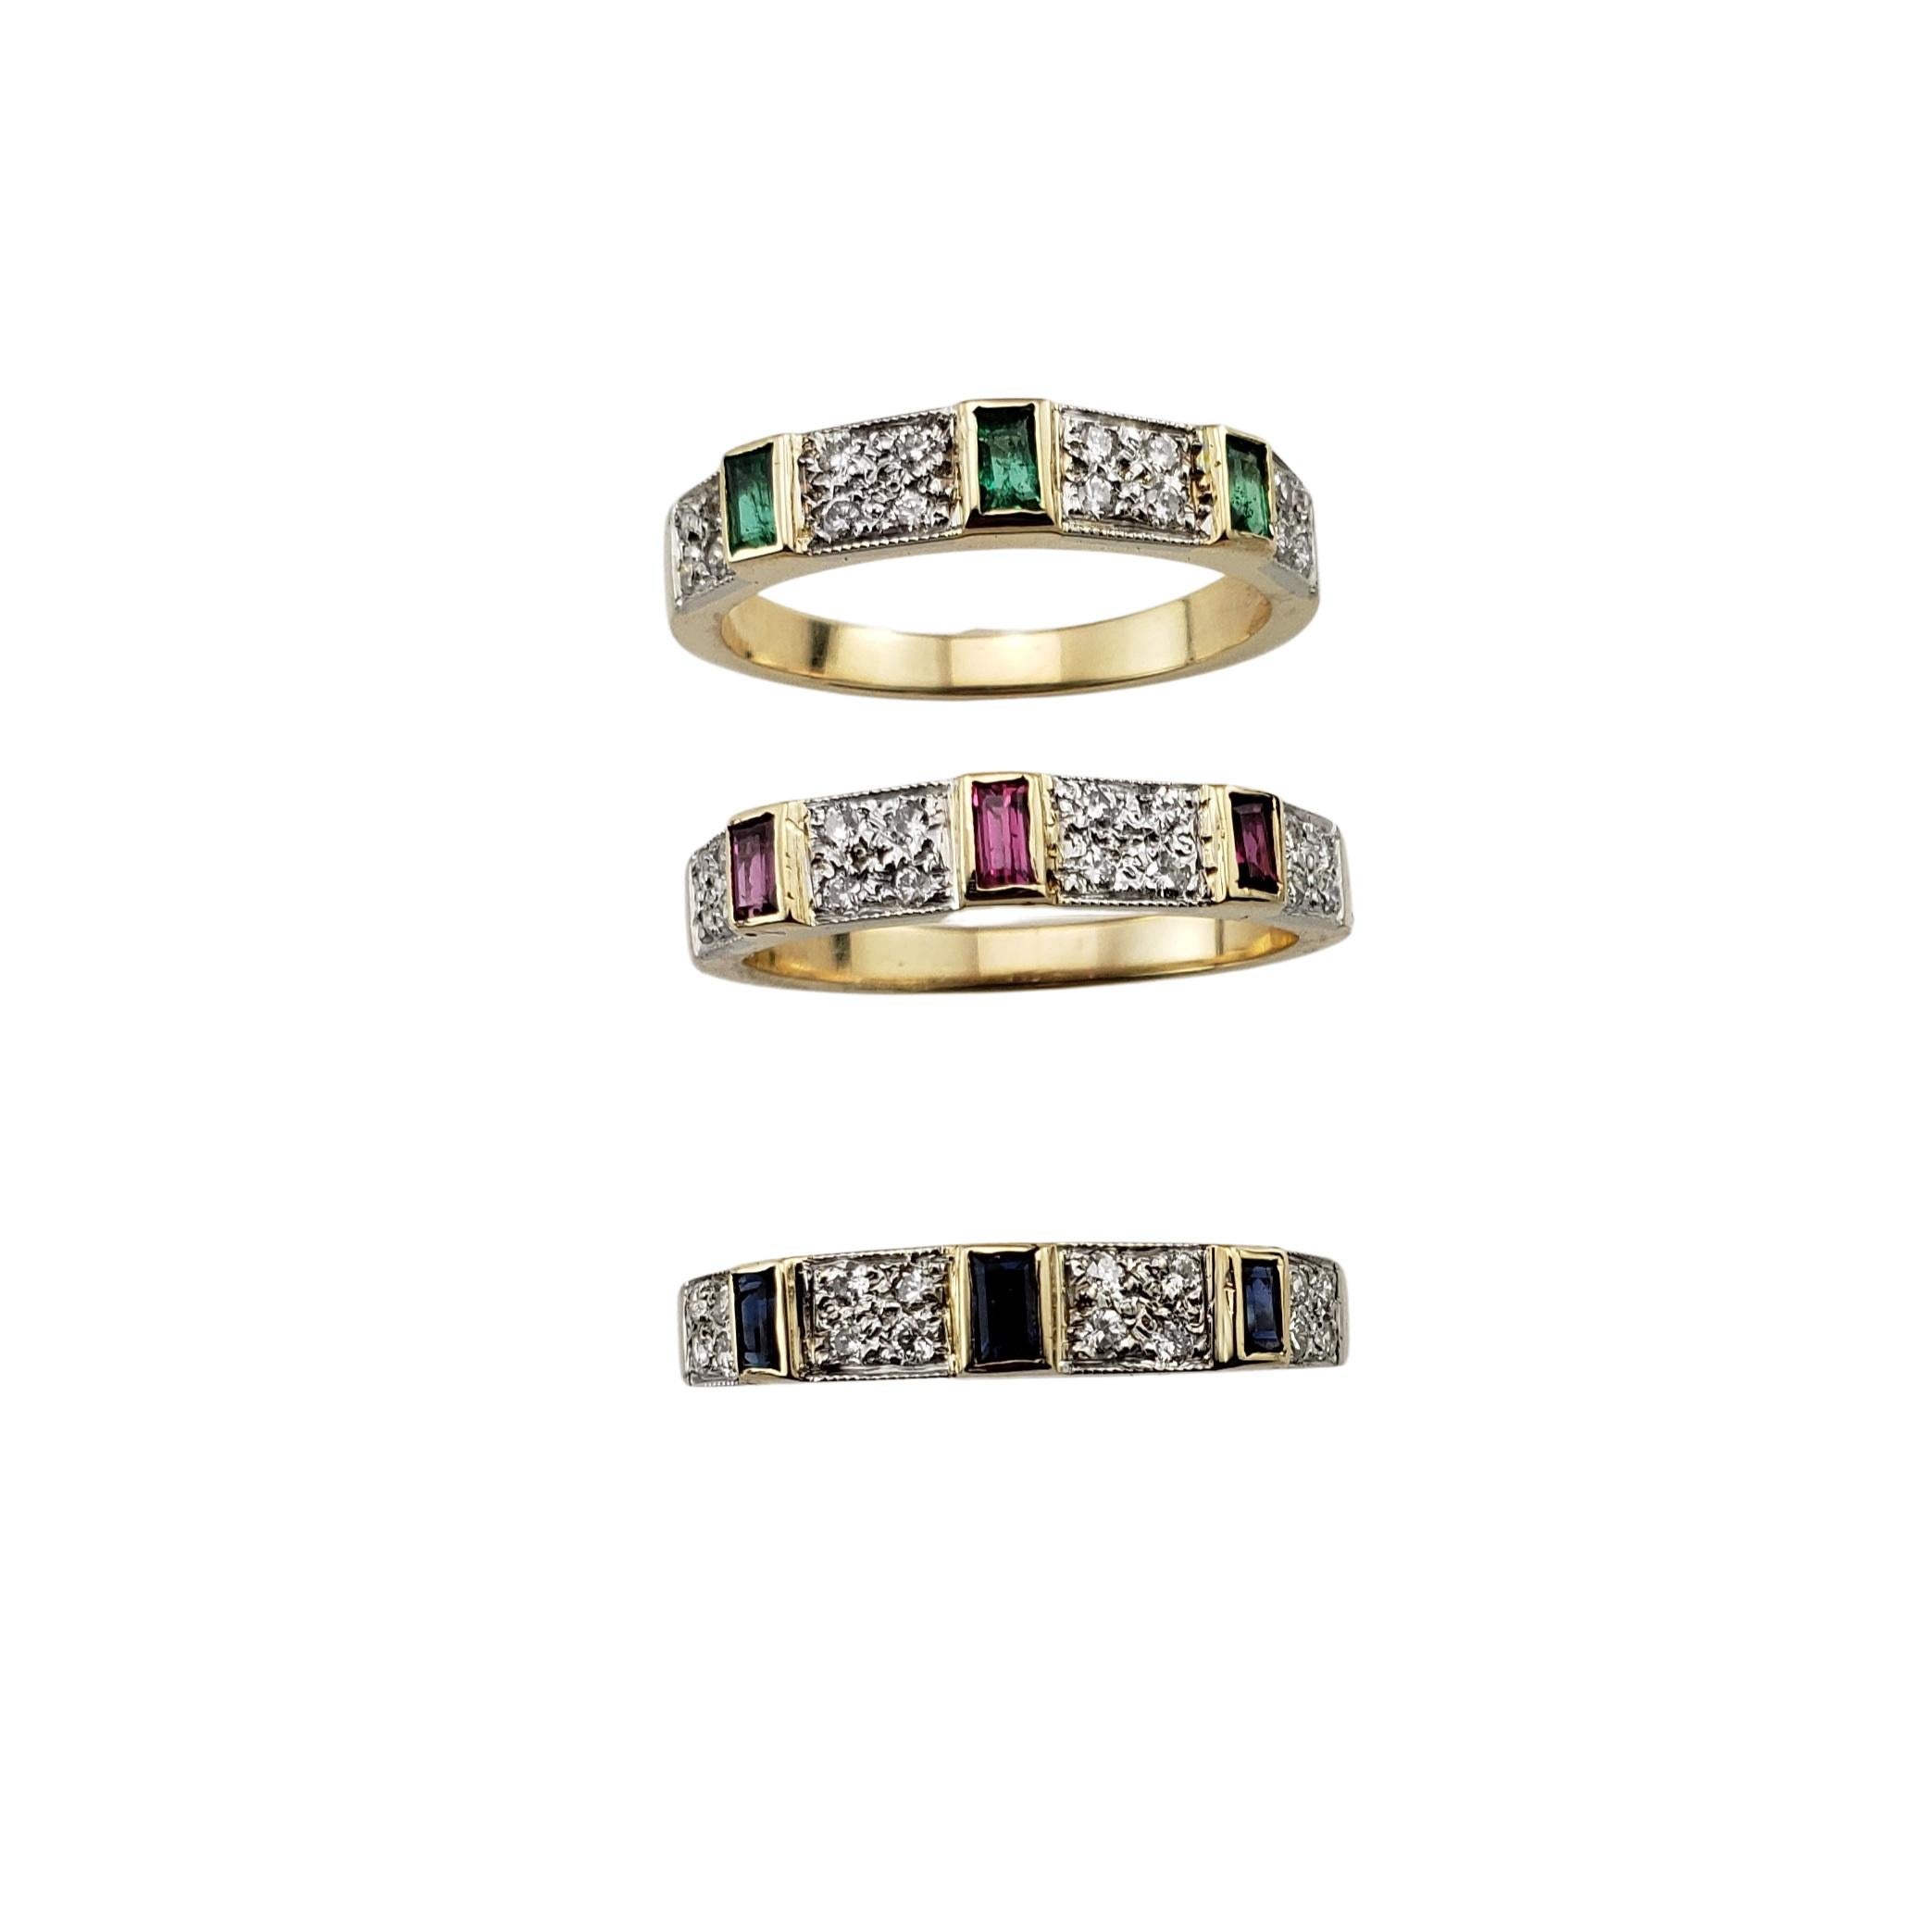 Set of 3 Ruby/Emerald/Sapphire and Diamond Band Rings Size 6.25-

This lovely set of matching rings each feature three gemstones; (sapphires, emeralds and rubies) and 16 round brilliant cut diamonds set in classic 14K yellow gold.  Width of each